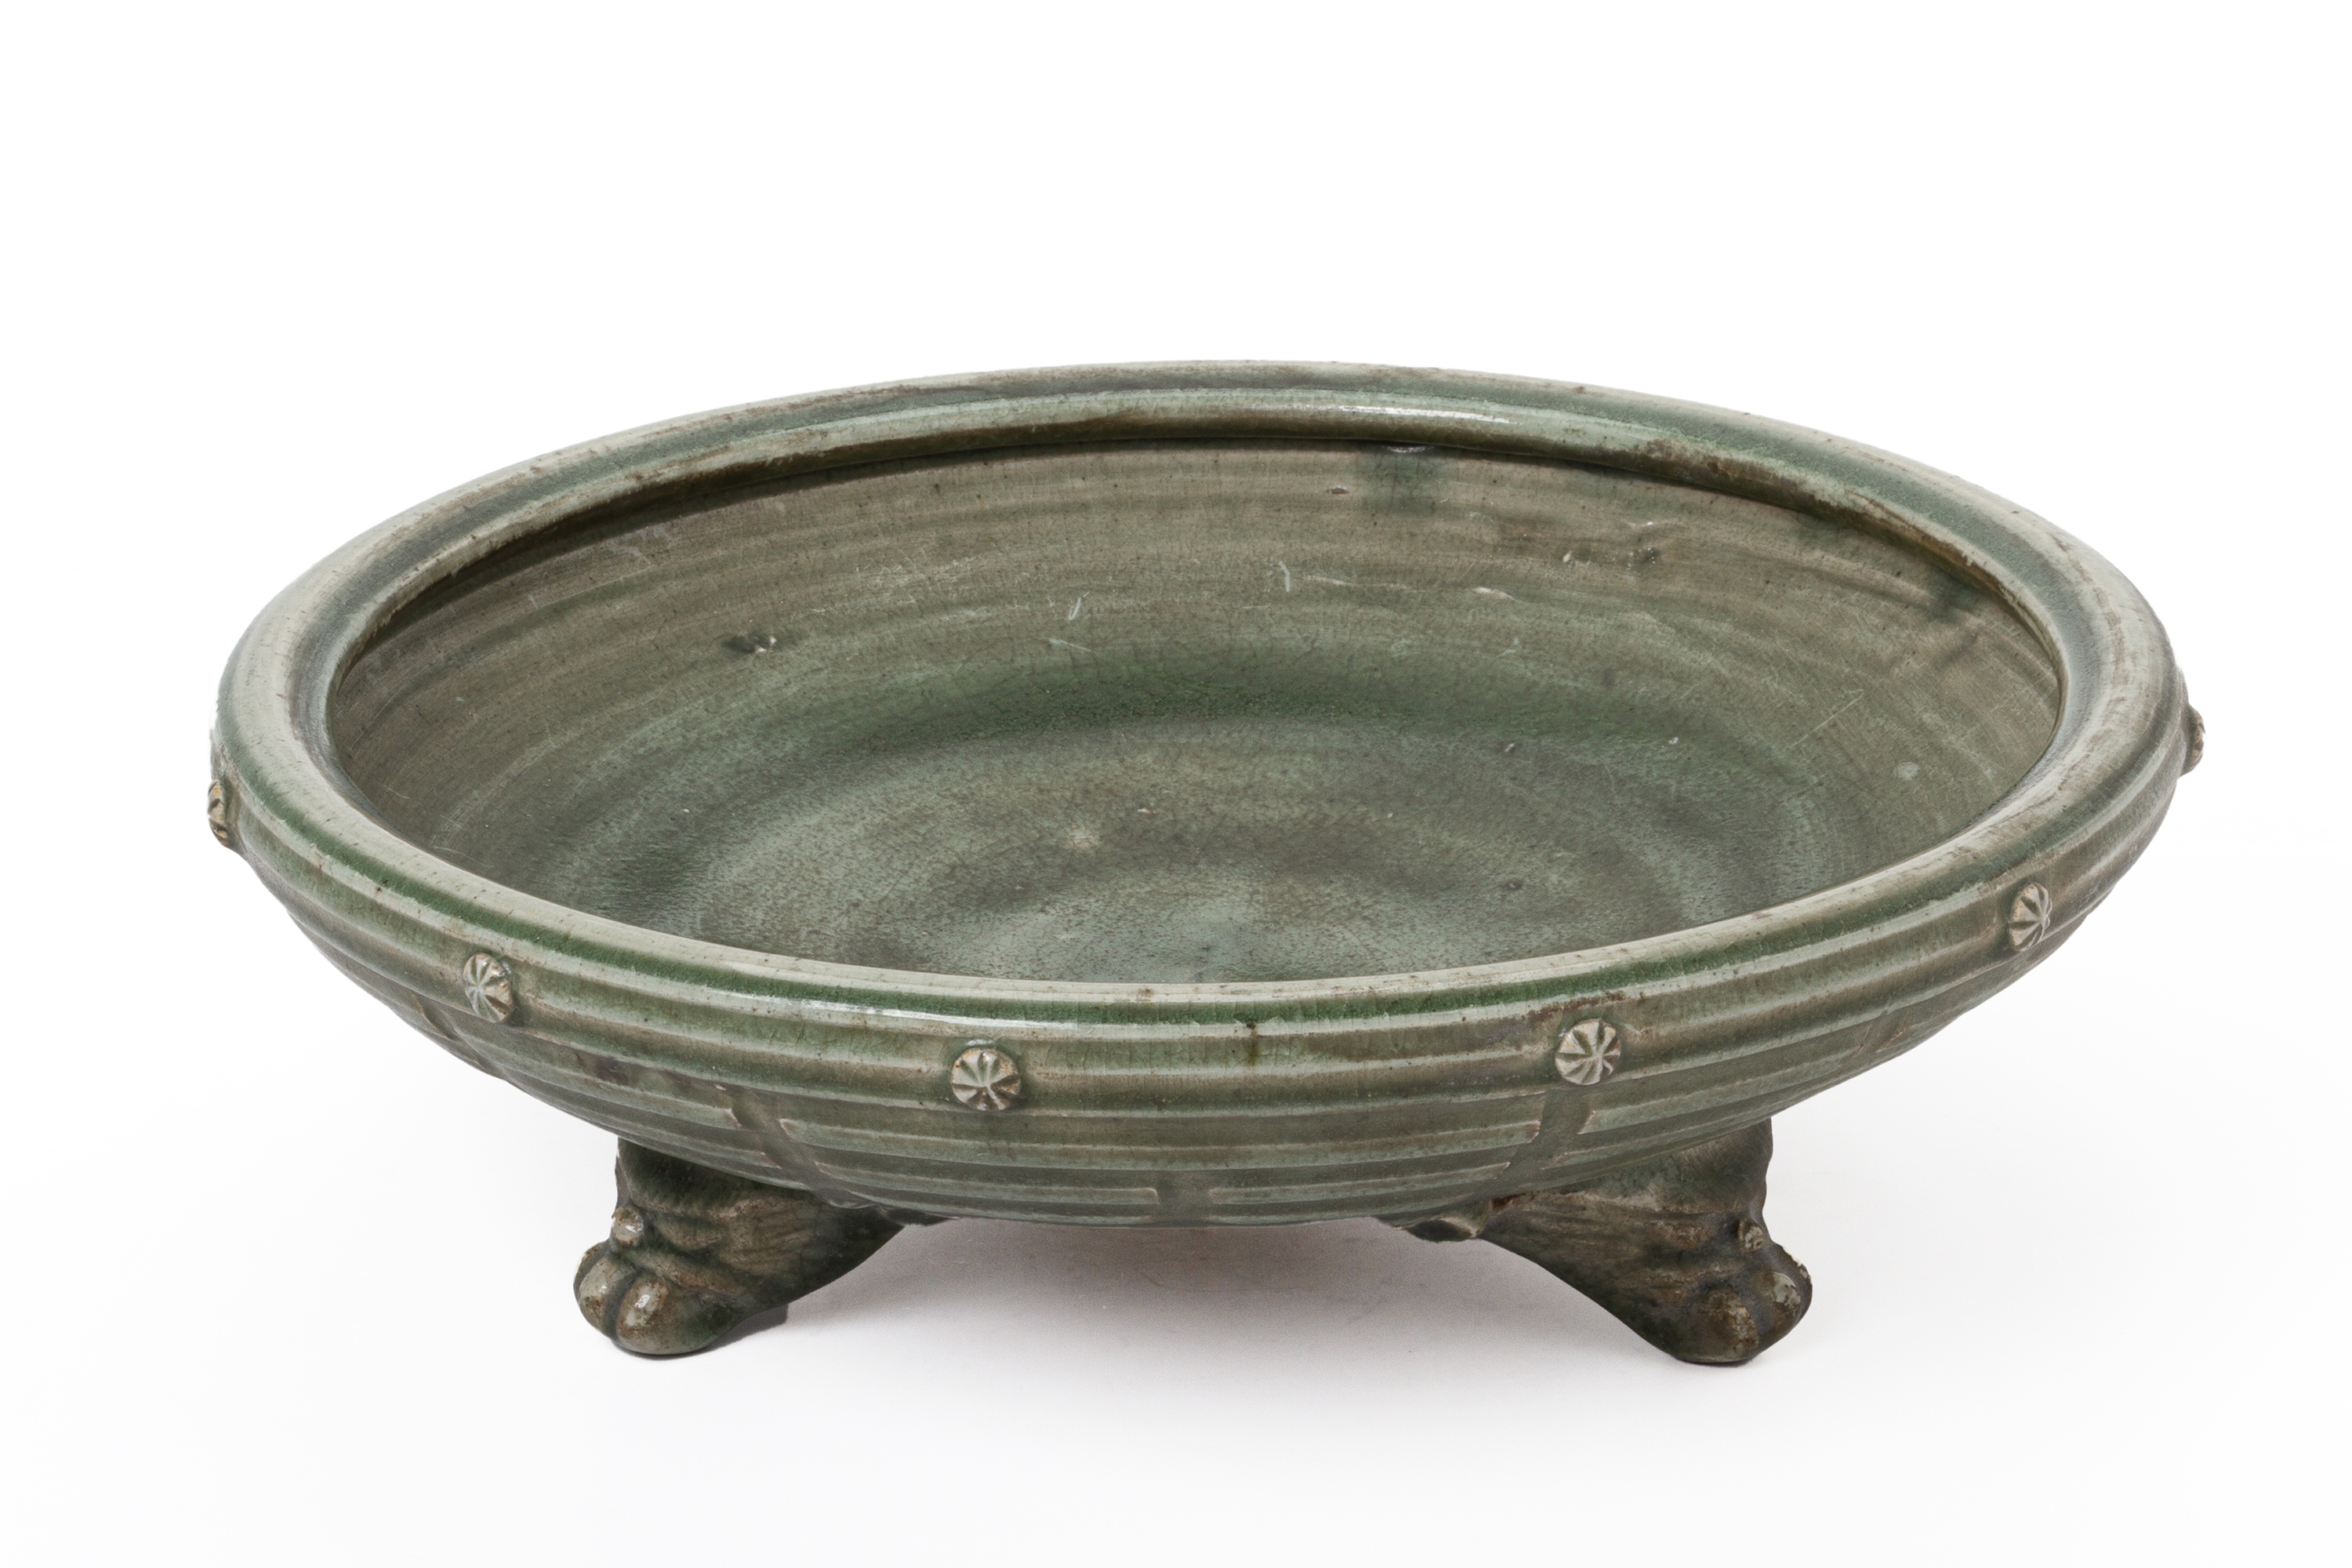 A LARGE CELADON EIGHT TRIGRAMS TRIPOD CENSER - Image 3 of 3